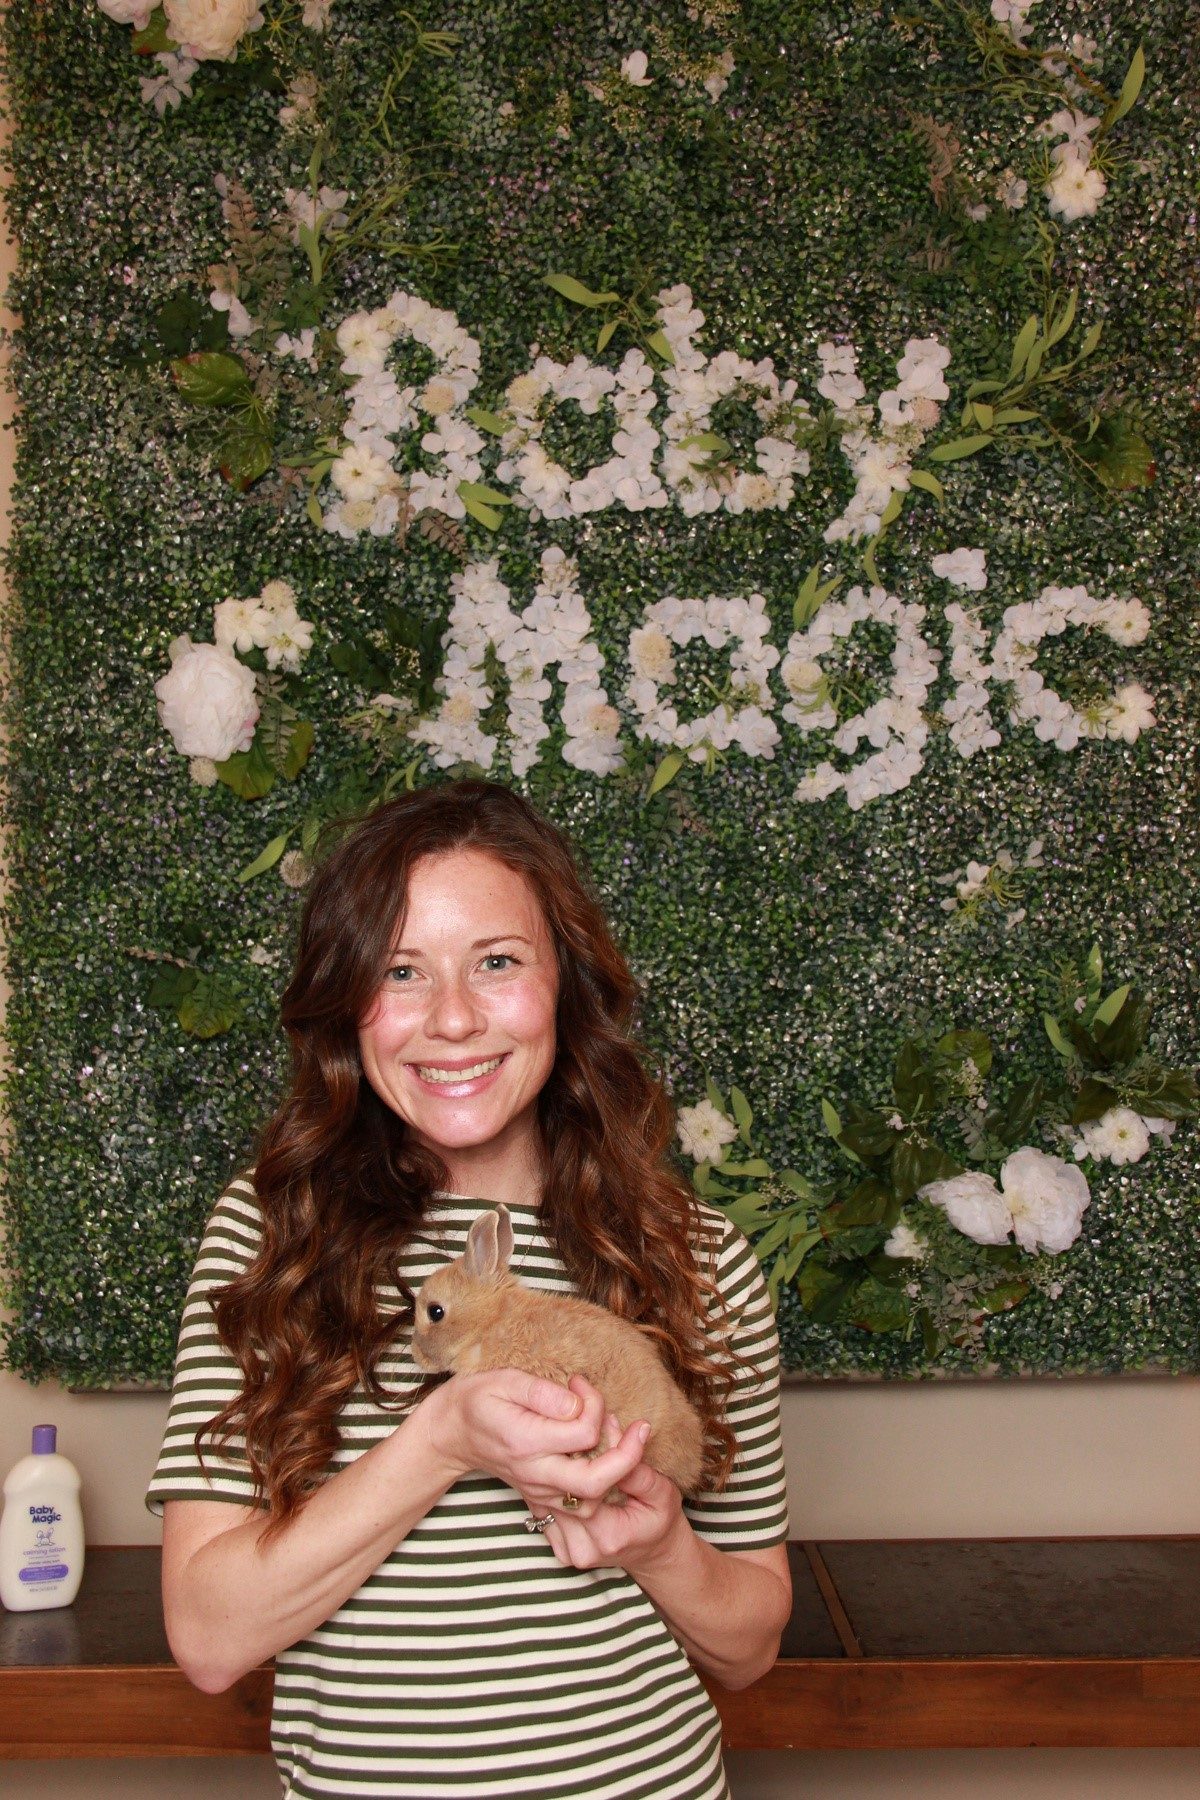 Baby Magic Event Woman wearing green striped shirt holding a baby bunny